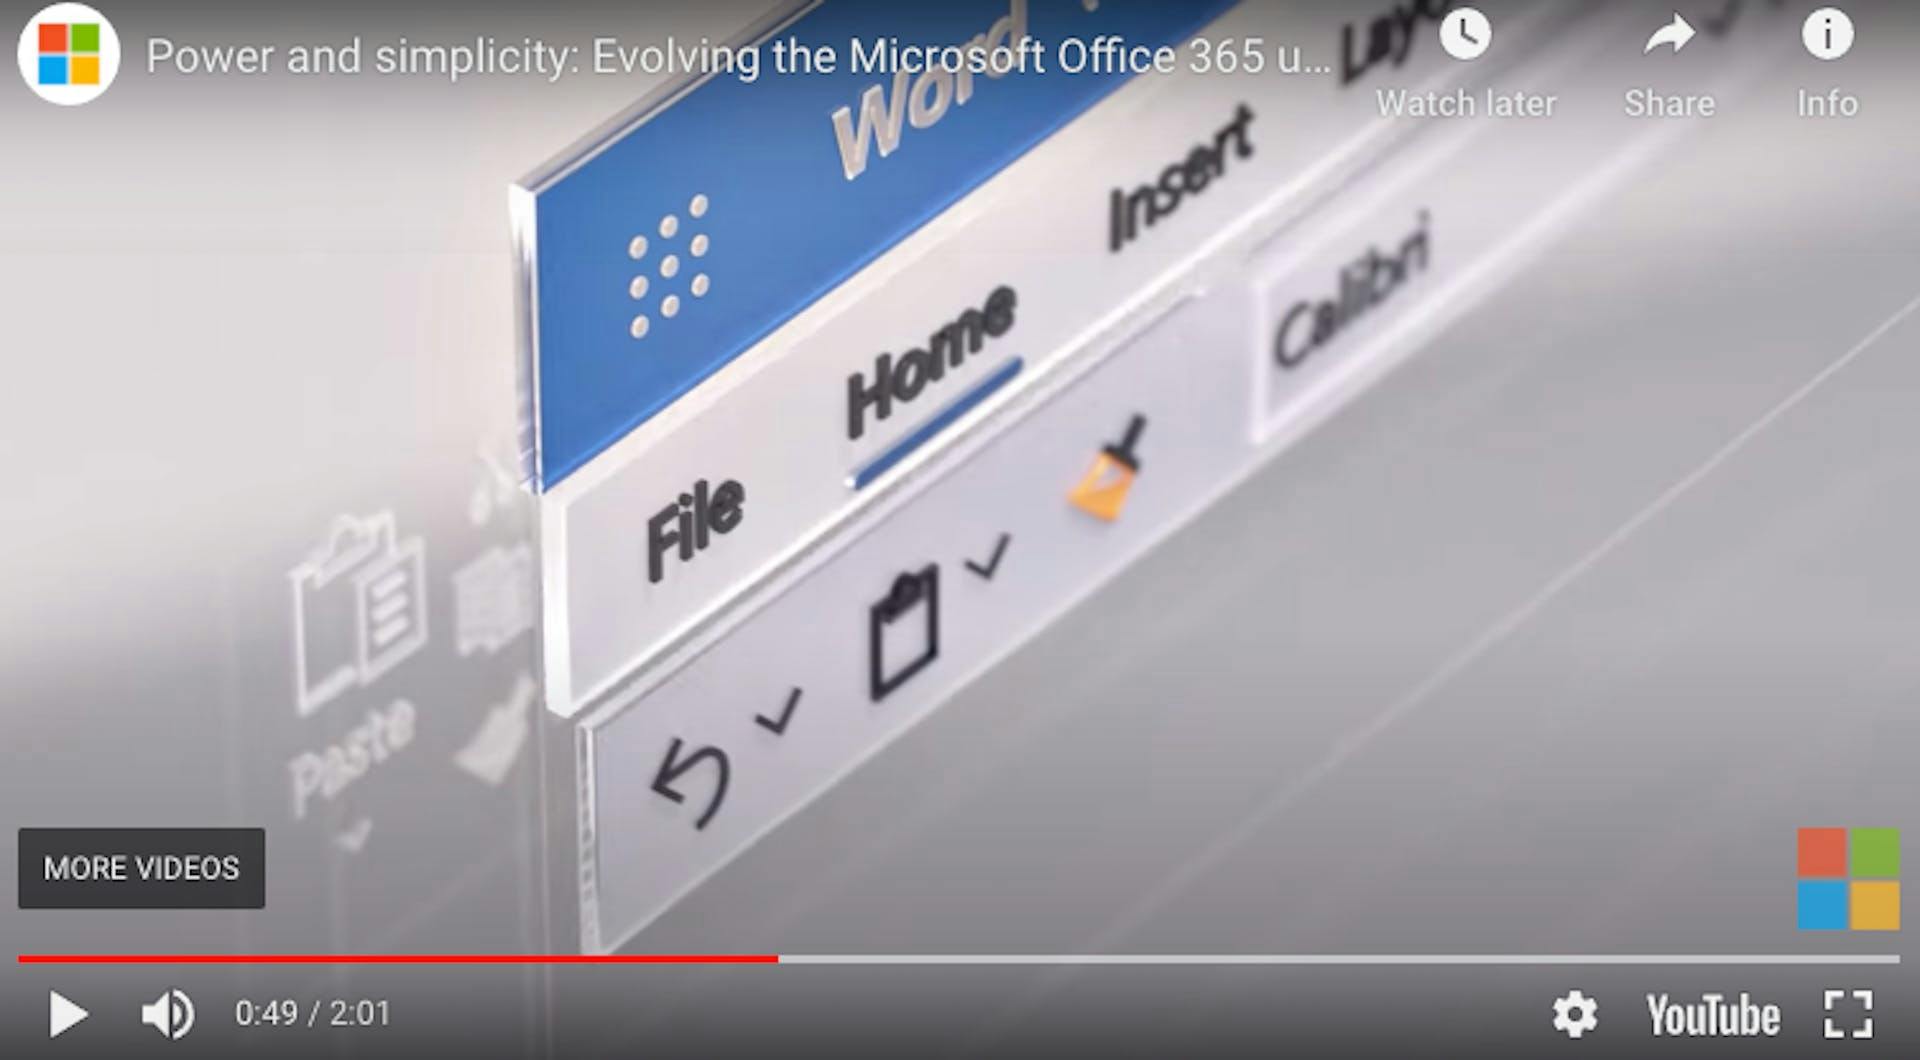 Microsoft's brand video features stylised versions of upgrades to its Office 365 products